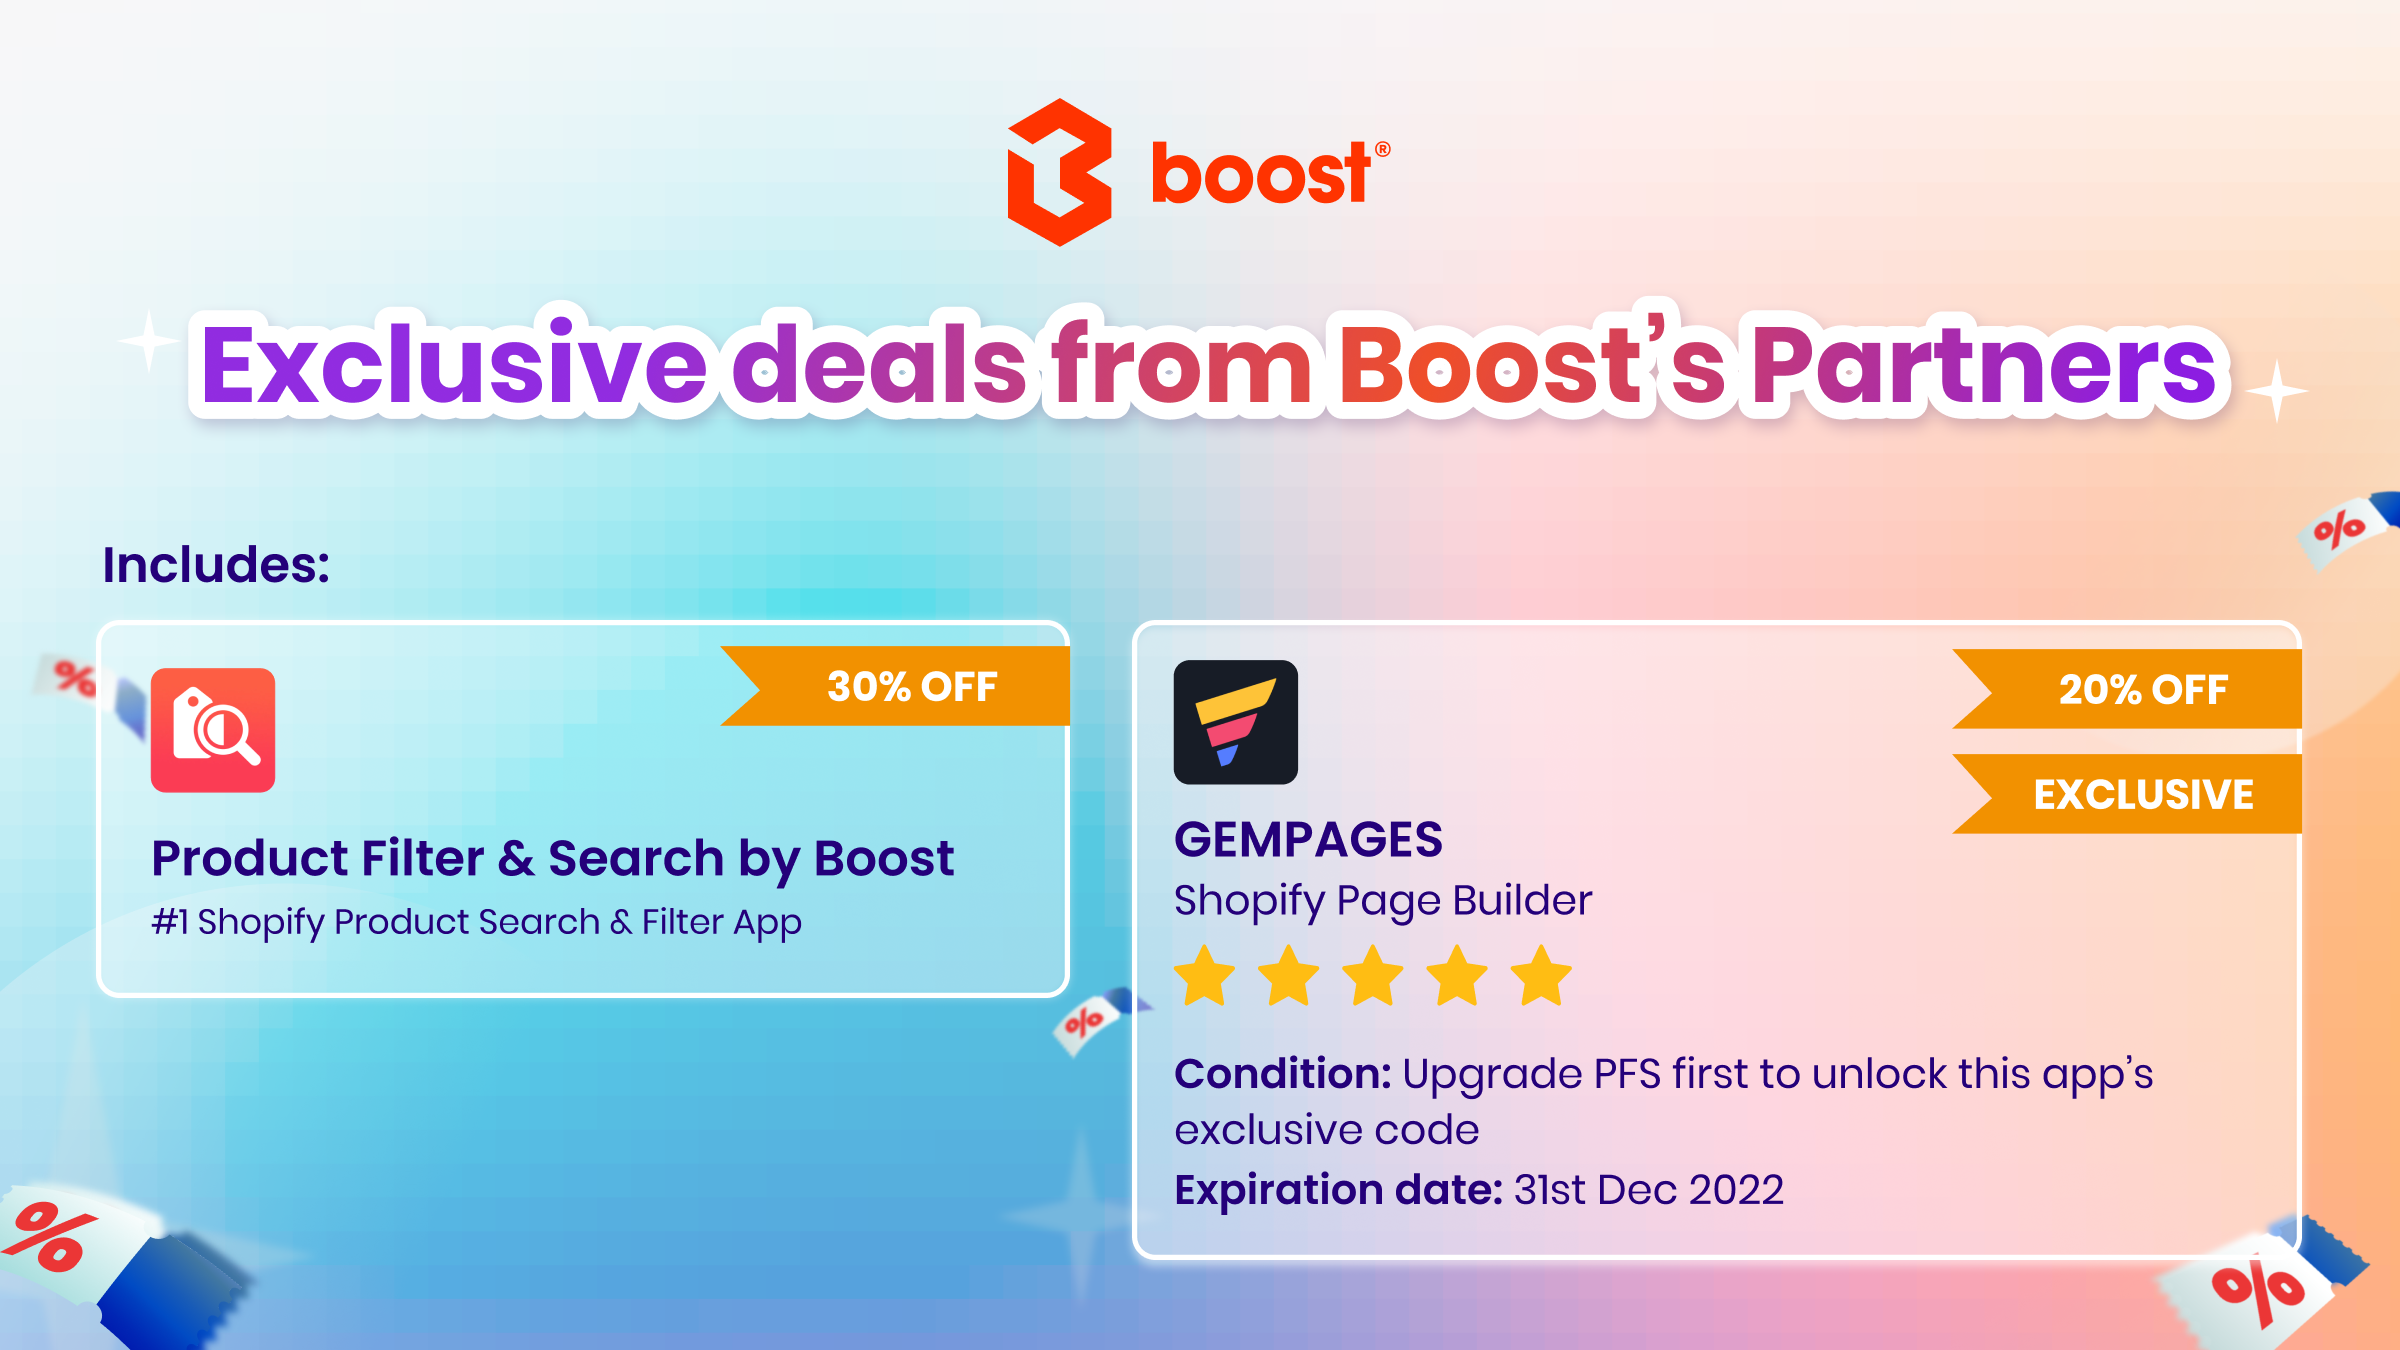 gempages shopify page builder bfcm deal with boost